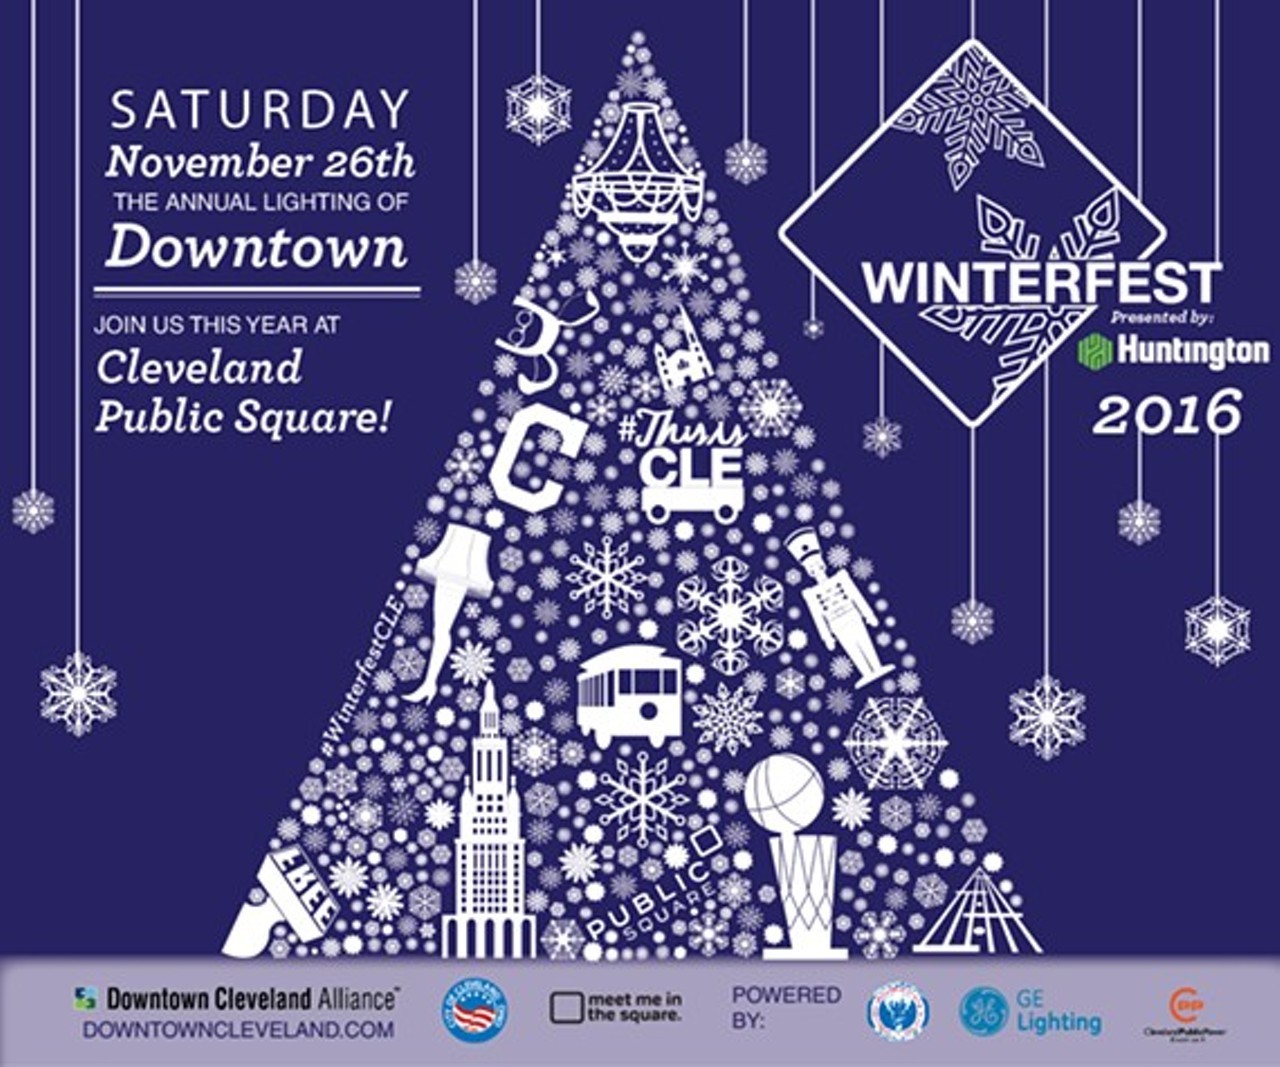 Winterfest at Public Square 
When: Sat., Nov. 26, 1-7 p.m. 
Phone: 216-325-0993 
Email: DTCLE@downtowncleveland.com 
Price: FREE 
www.downtowncleveland.com/events/winterfest
Downtown Cleveland is your prime destination for kicking off the holiday season! On the Saturday following Thanksgiving, bring your family Downtown as Huntington presents Winterfest, an all day holiday celebration! Take in the magic as you experience Downtown&#146;s vibrancy through free horse and carriage rides, the tree-lighting ceremony at Public Square, a fireworks show and more!